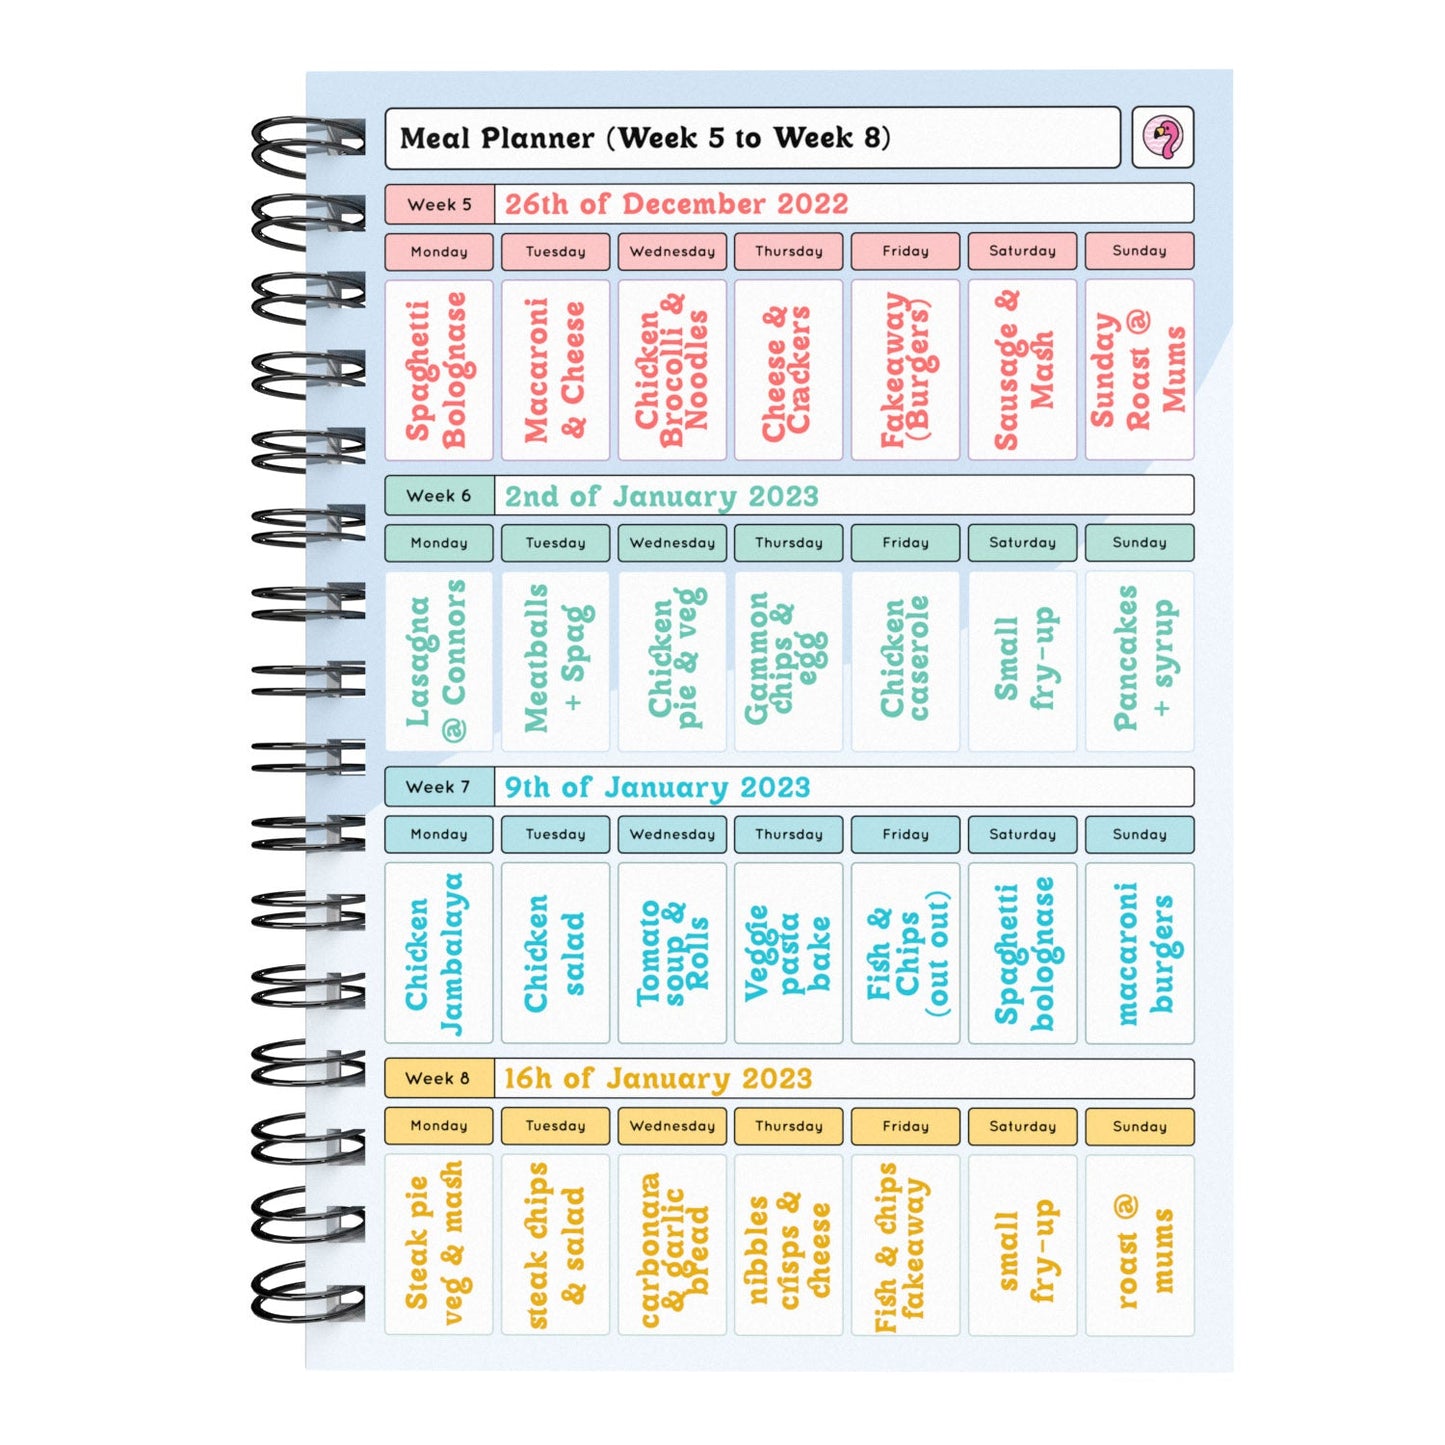 Food Diary - C78 - Calorie Counting